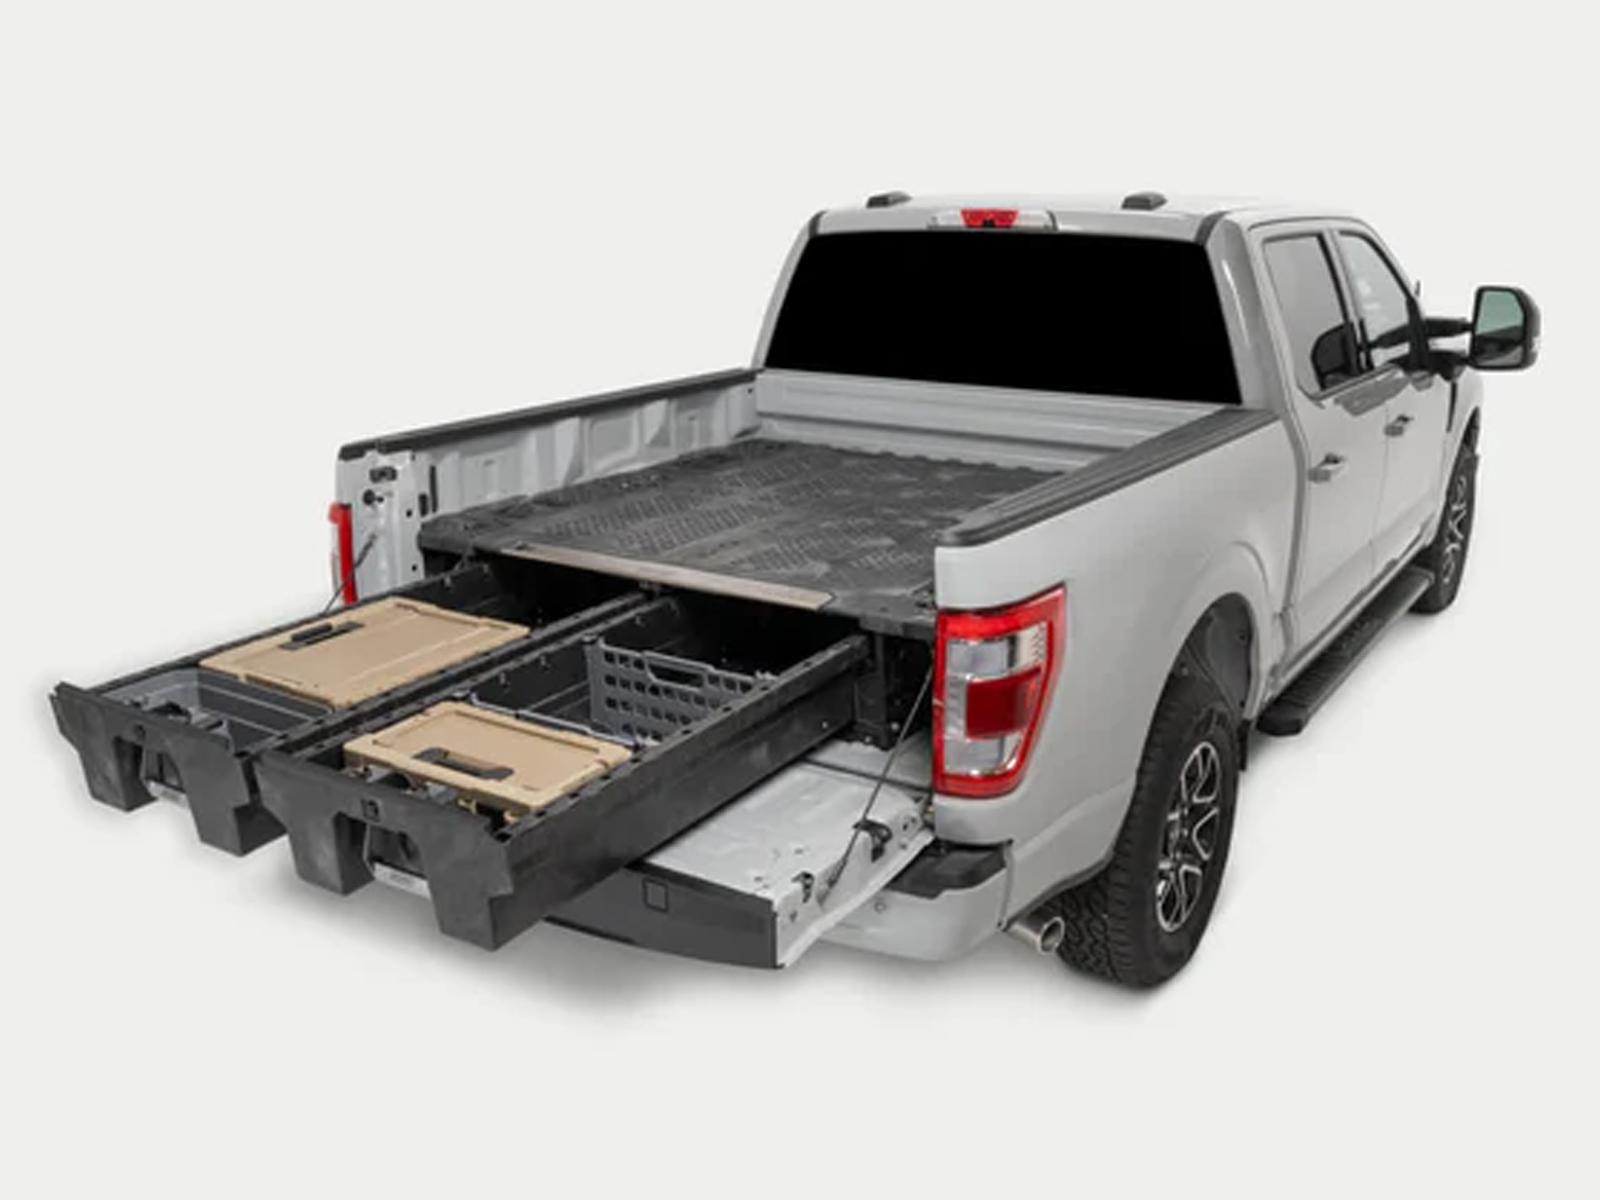 https://realtruck.com/production/decked-truck-bed-storage-system-full-size/07dc868e04509a430dab69a55ba5f323.jpg